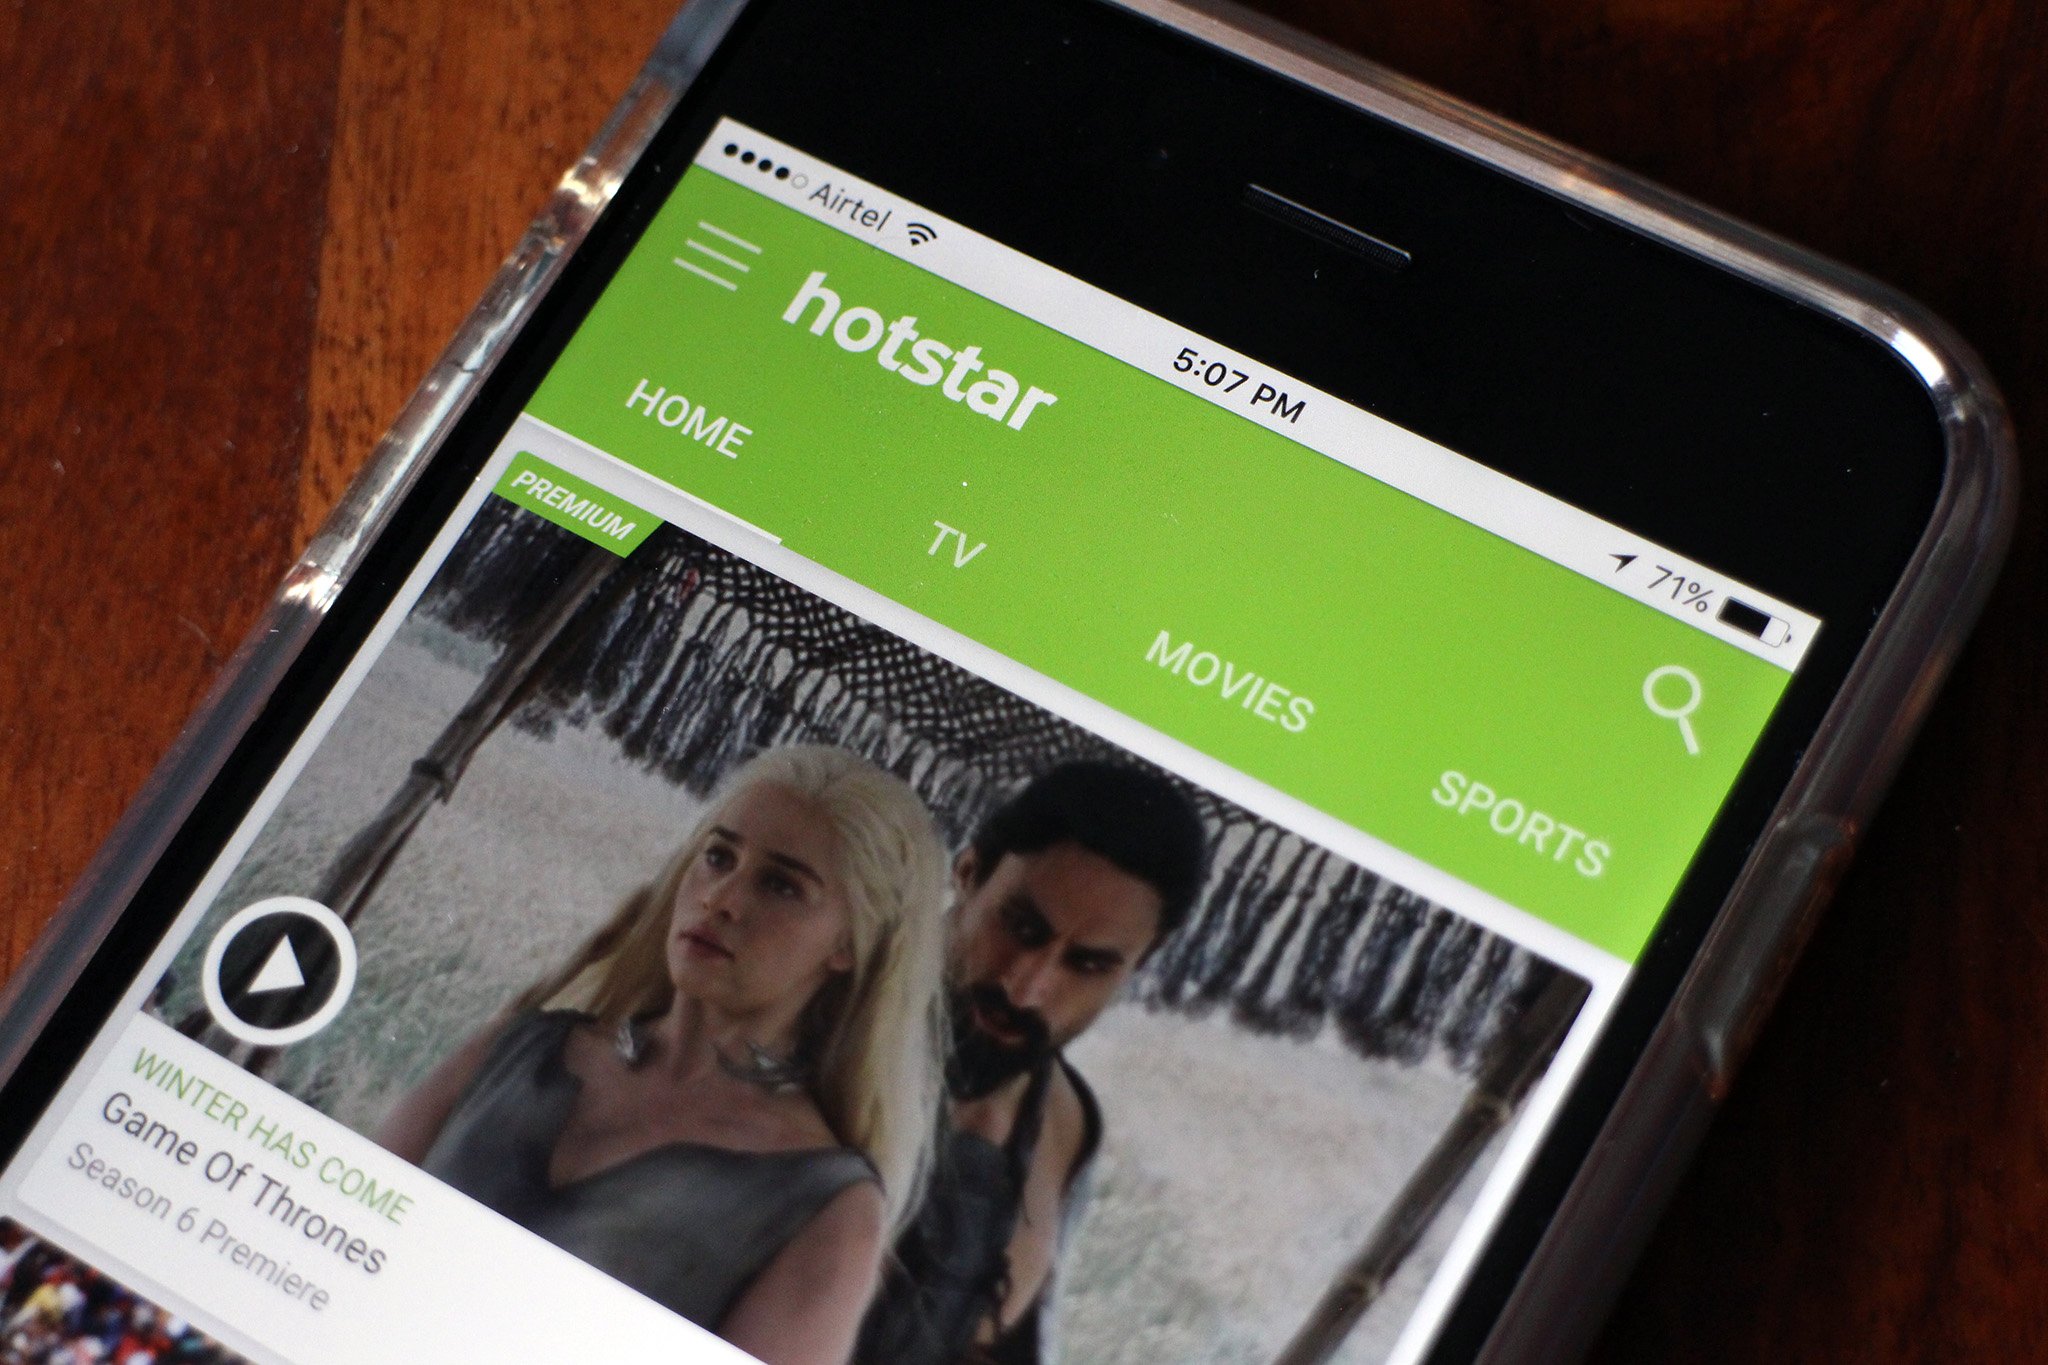 India S Hotstar Offers Same Day Broadcasts Of Game Of Thrones And